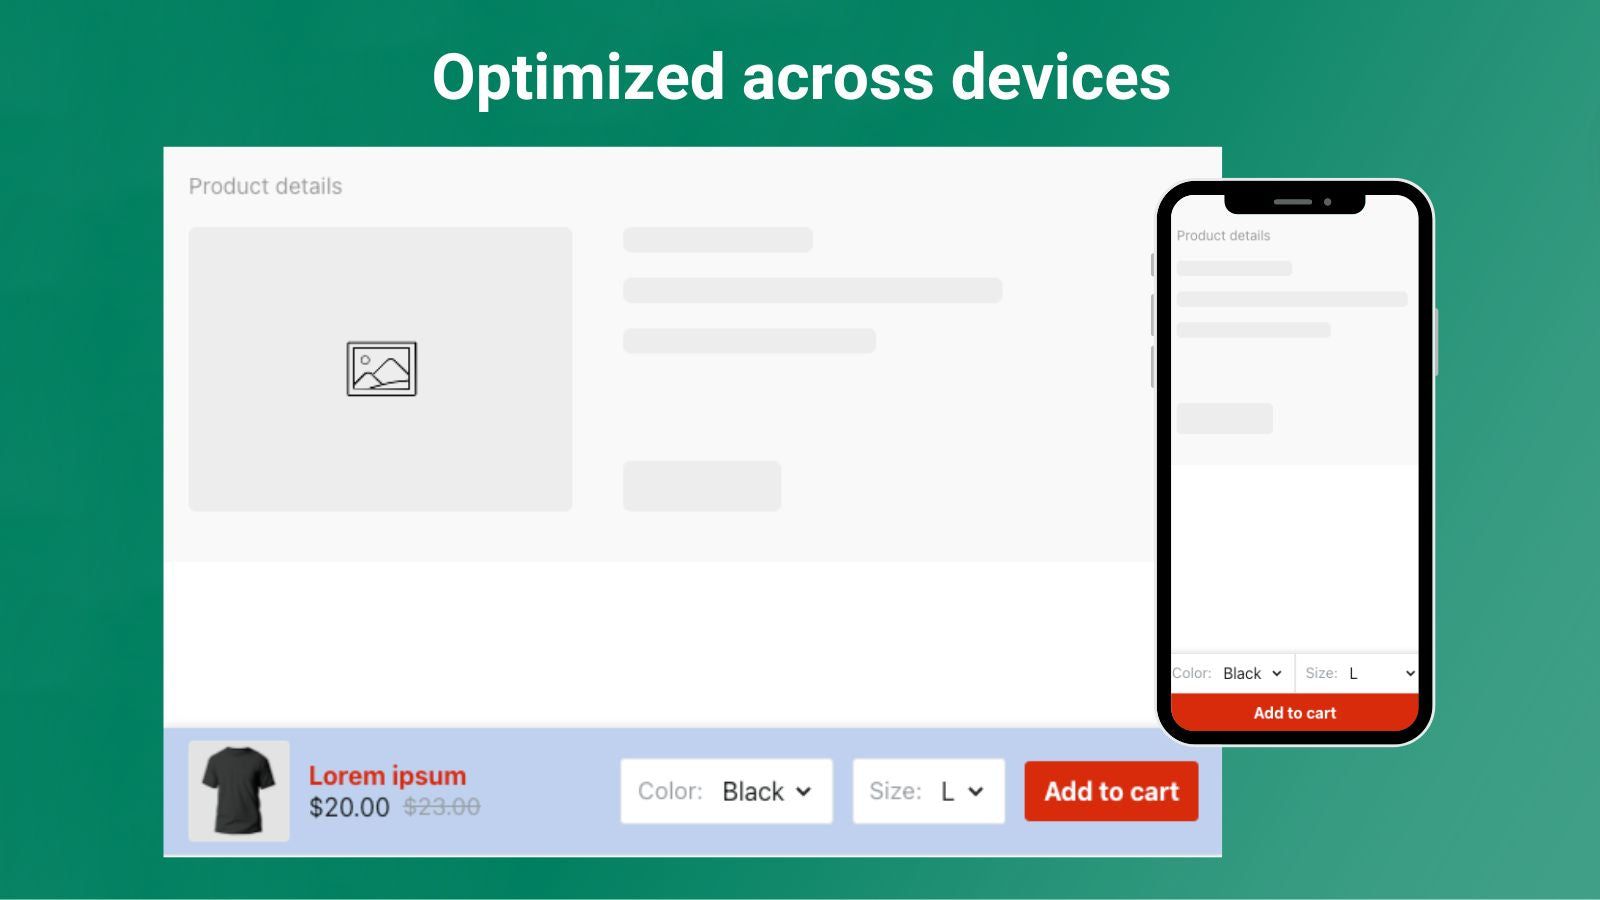 Optimized across devices